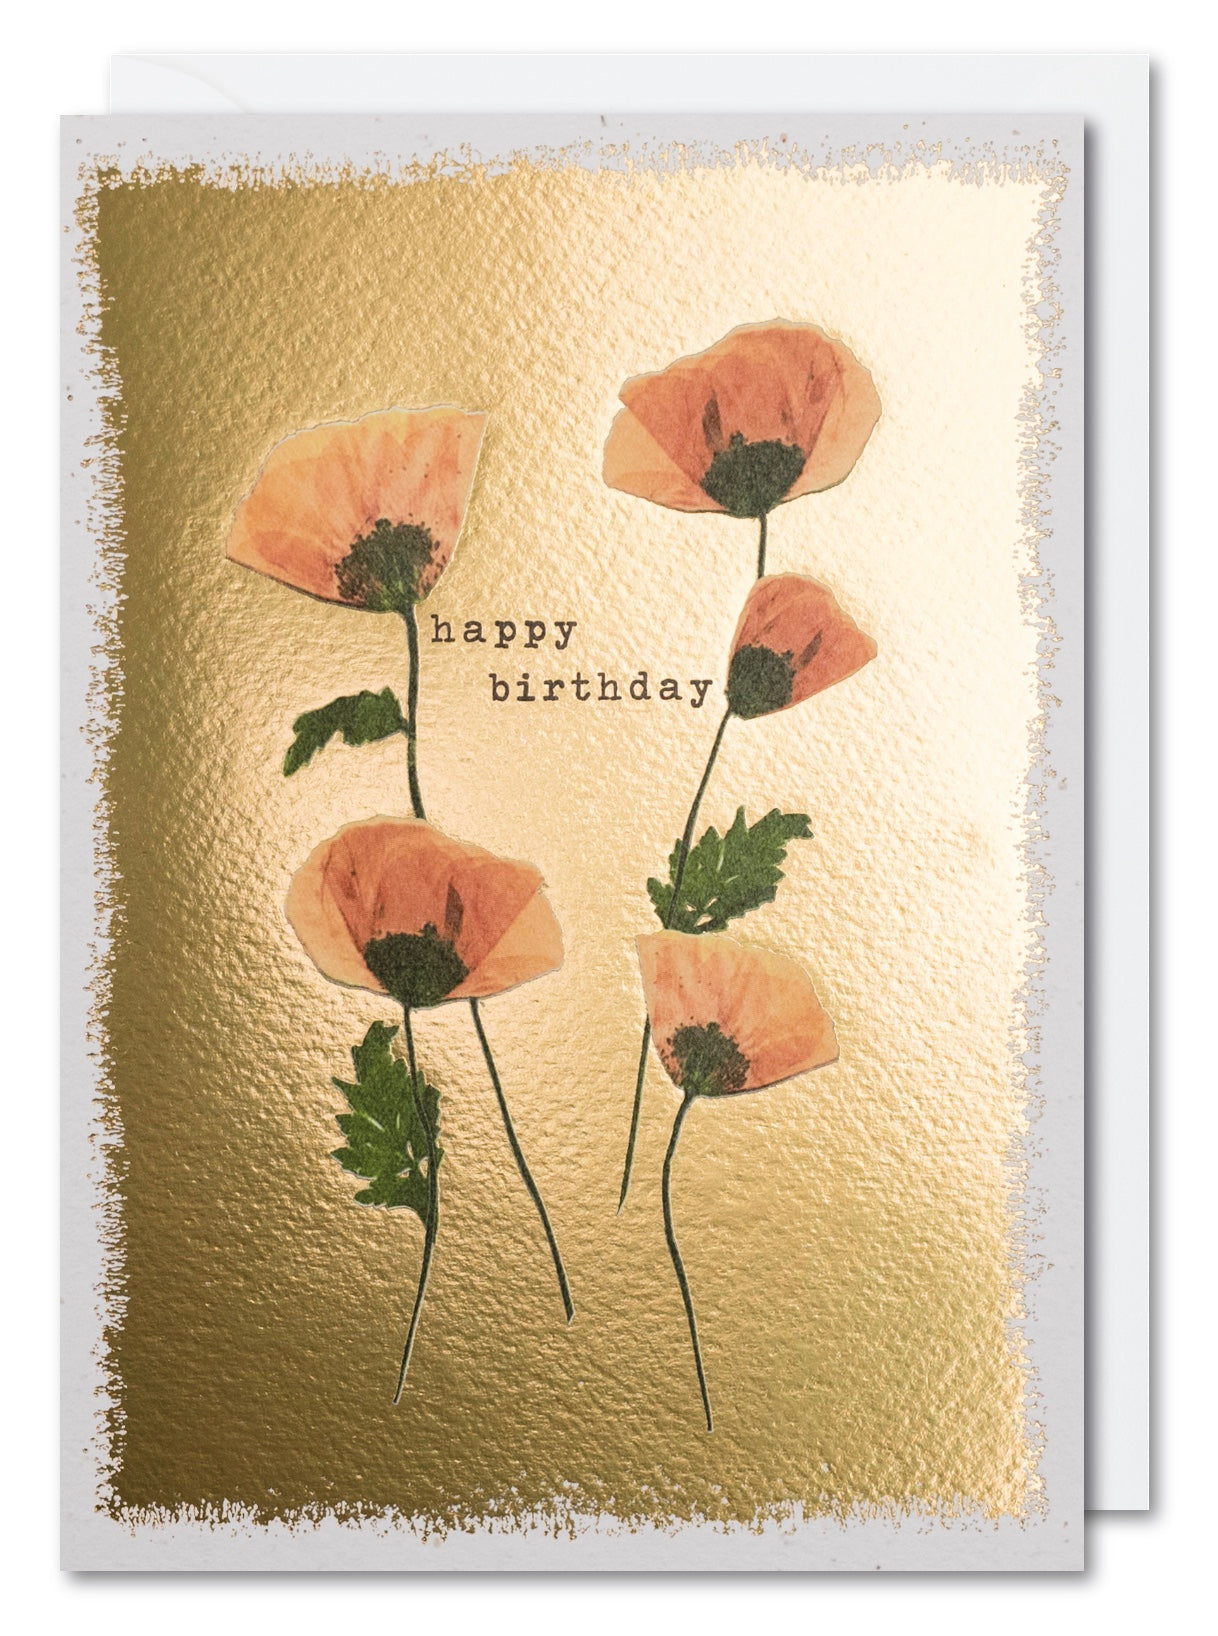 Gold Pressed Poppies Birthday Card by penny black